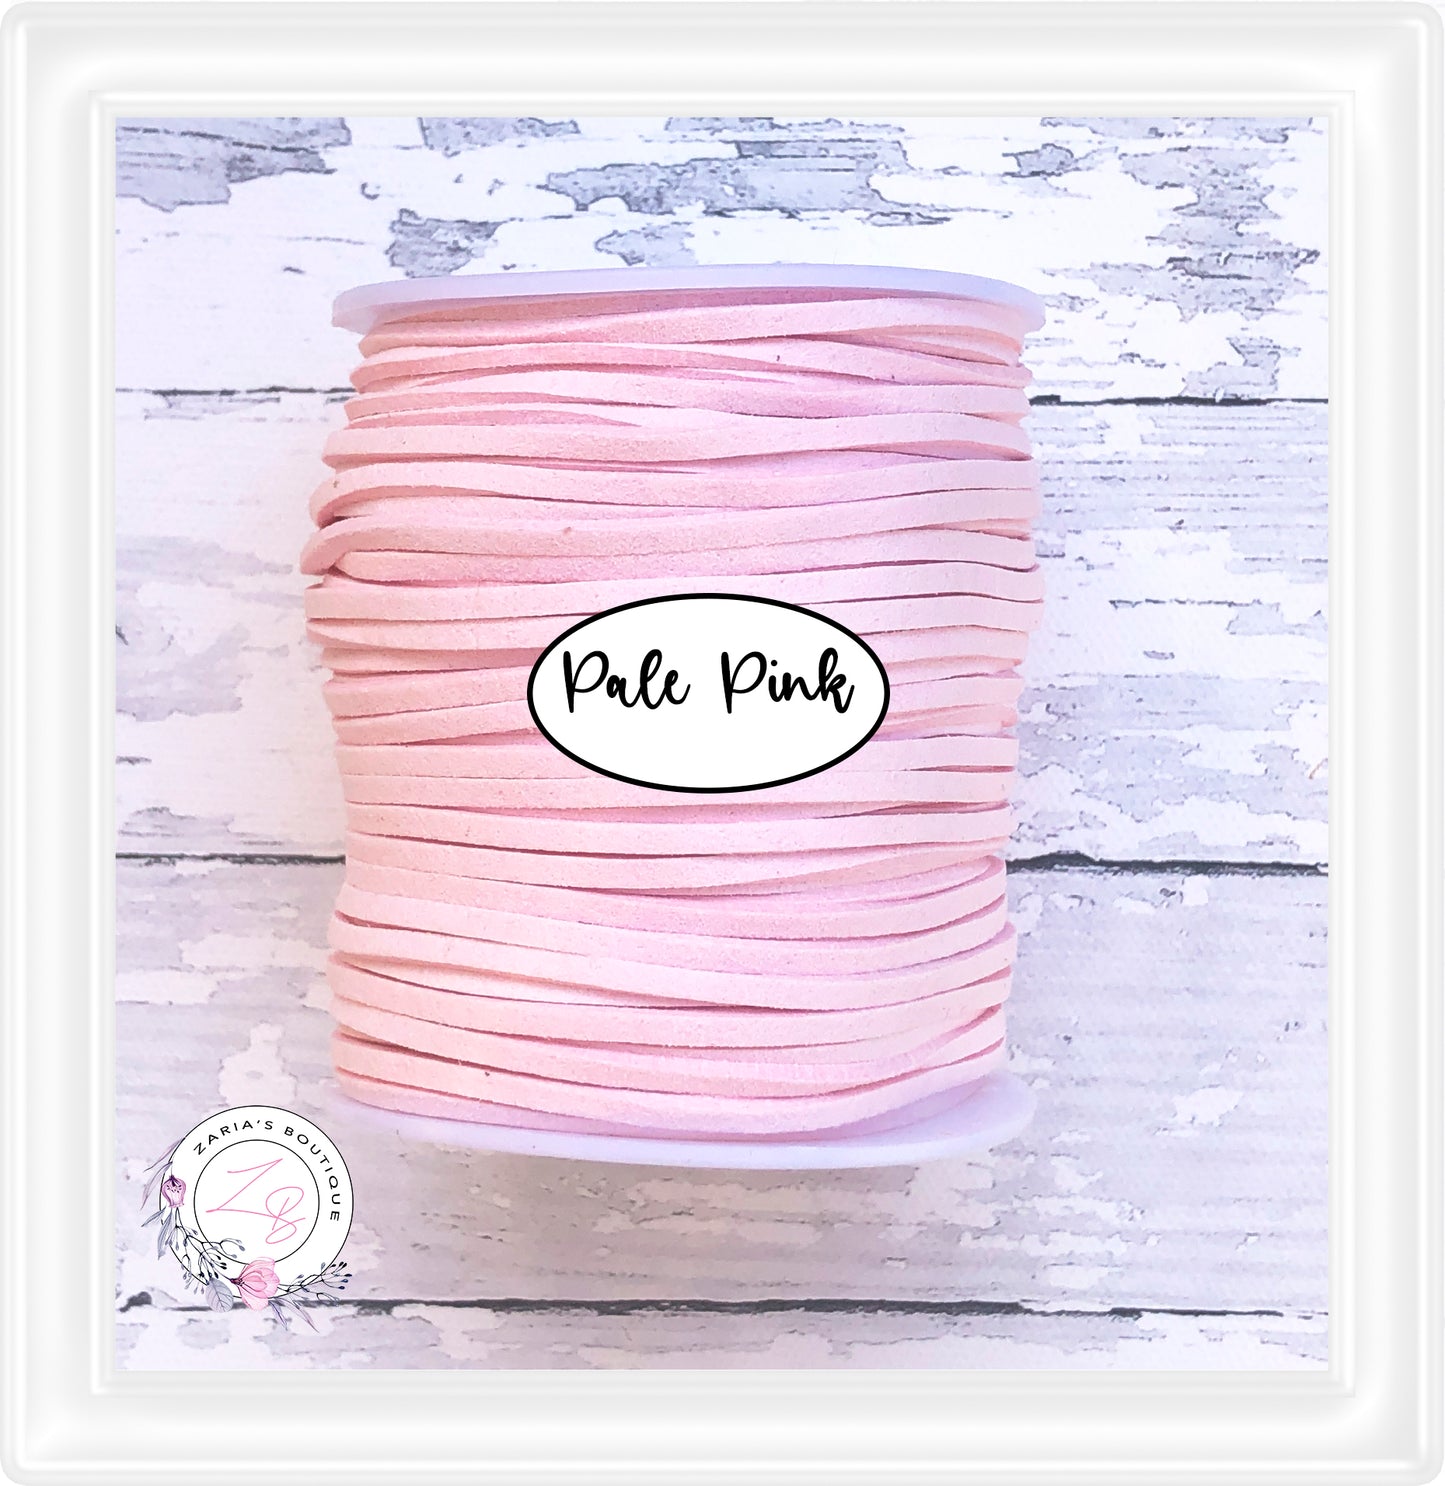 ⋅ Faux Suede Cord ⋅ 2.7mm ⋅ Pale Pink ⋅ 5 Metres ⋅